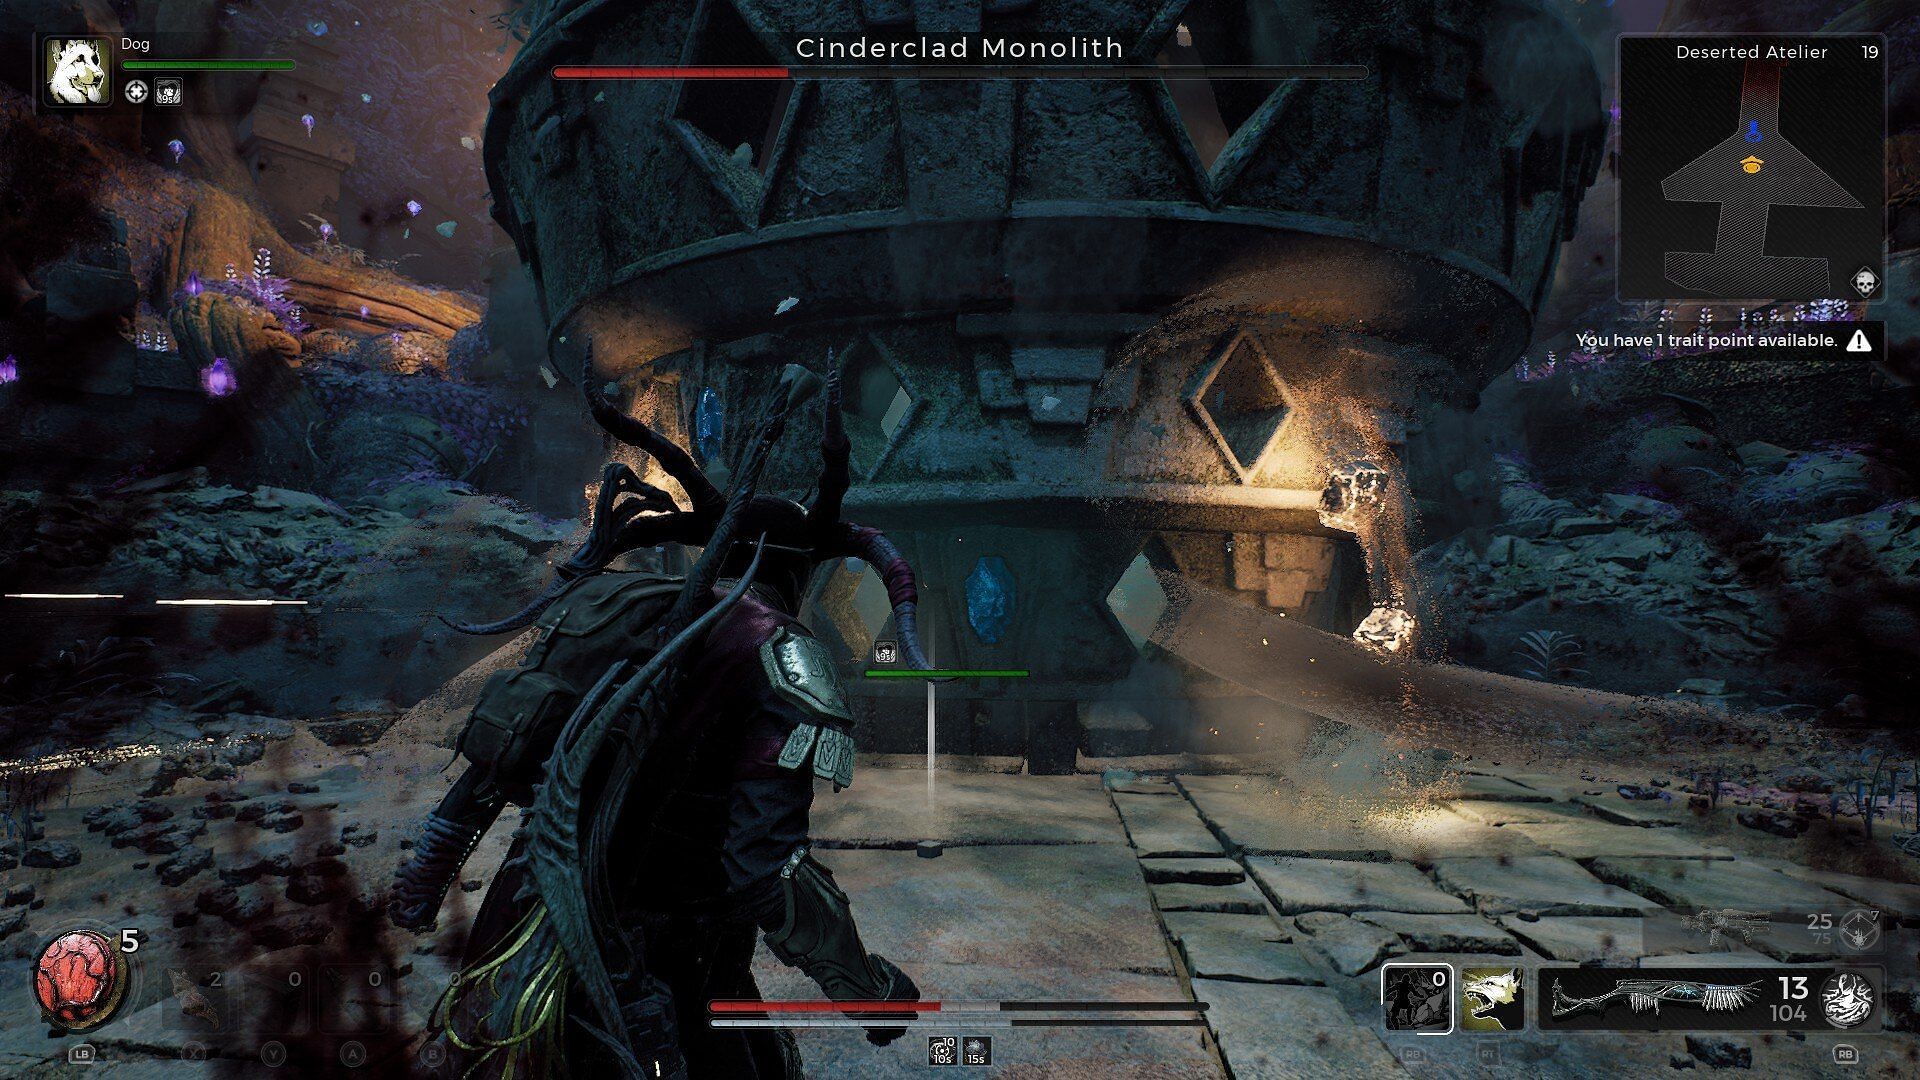 How to defeat the Cinderclad Monolith in Remnant 2 The Forgotten Kingdom DLC (Image via Gunfire Games)